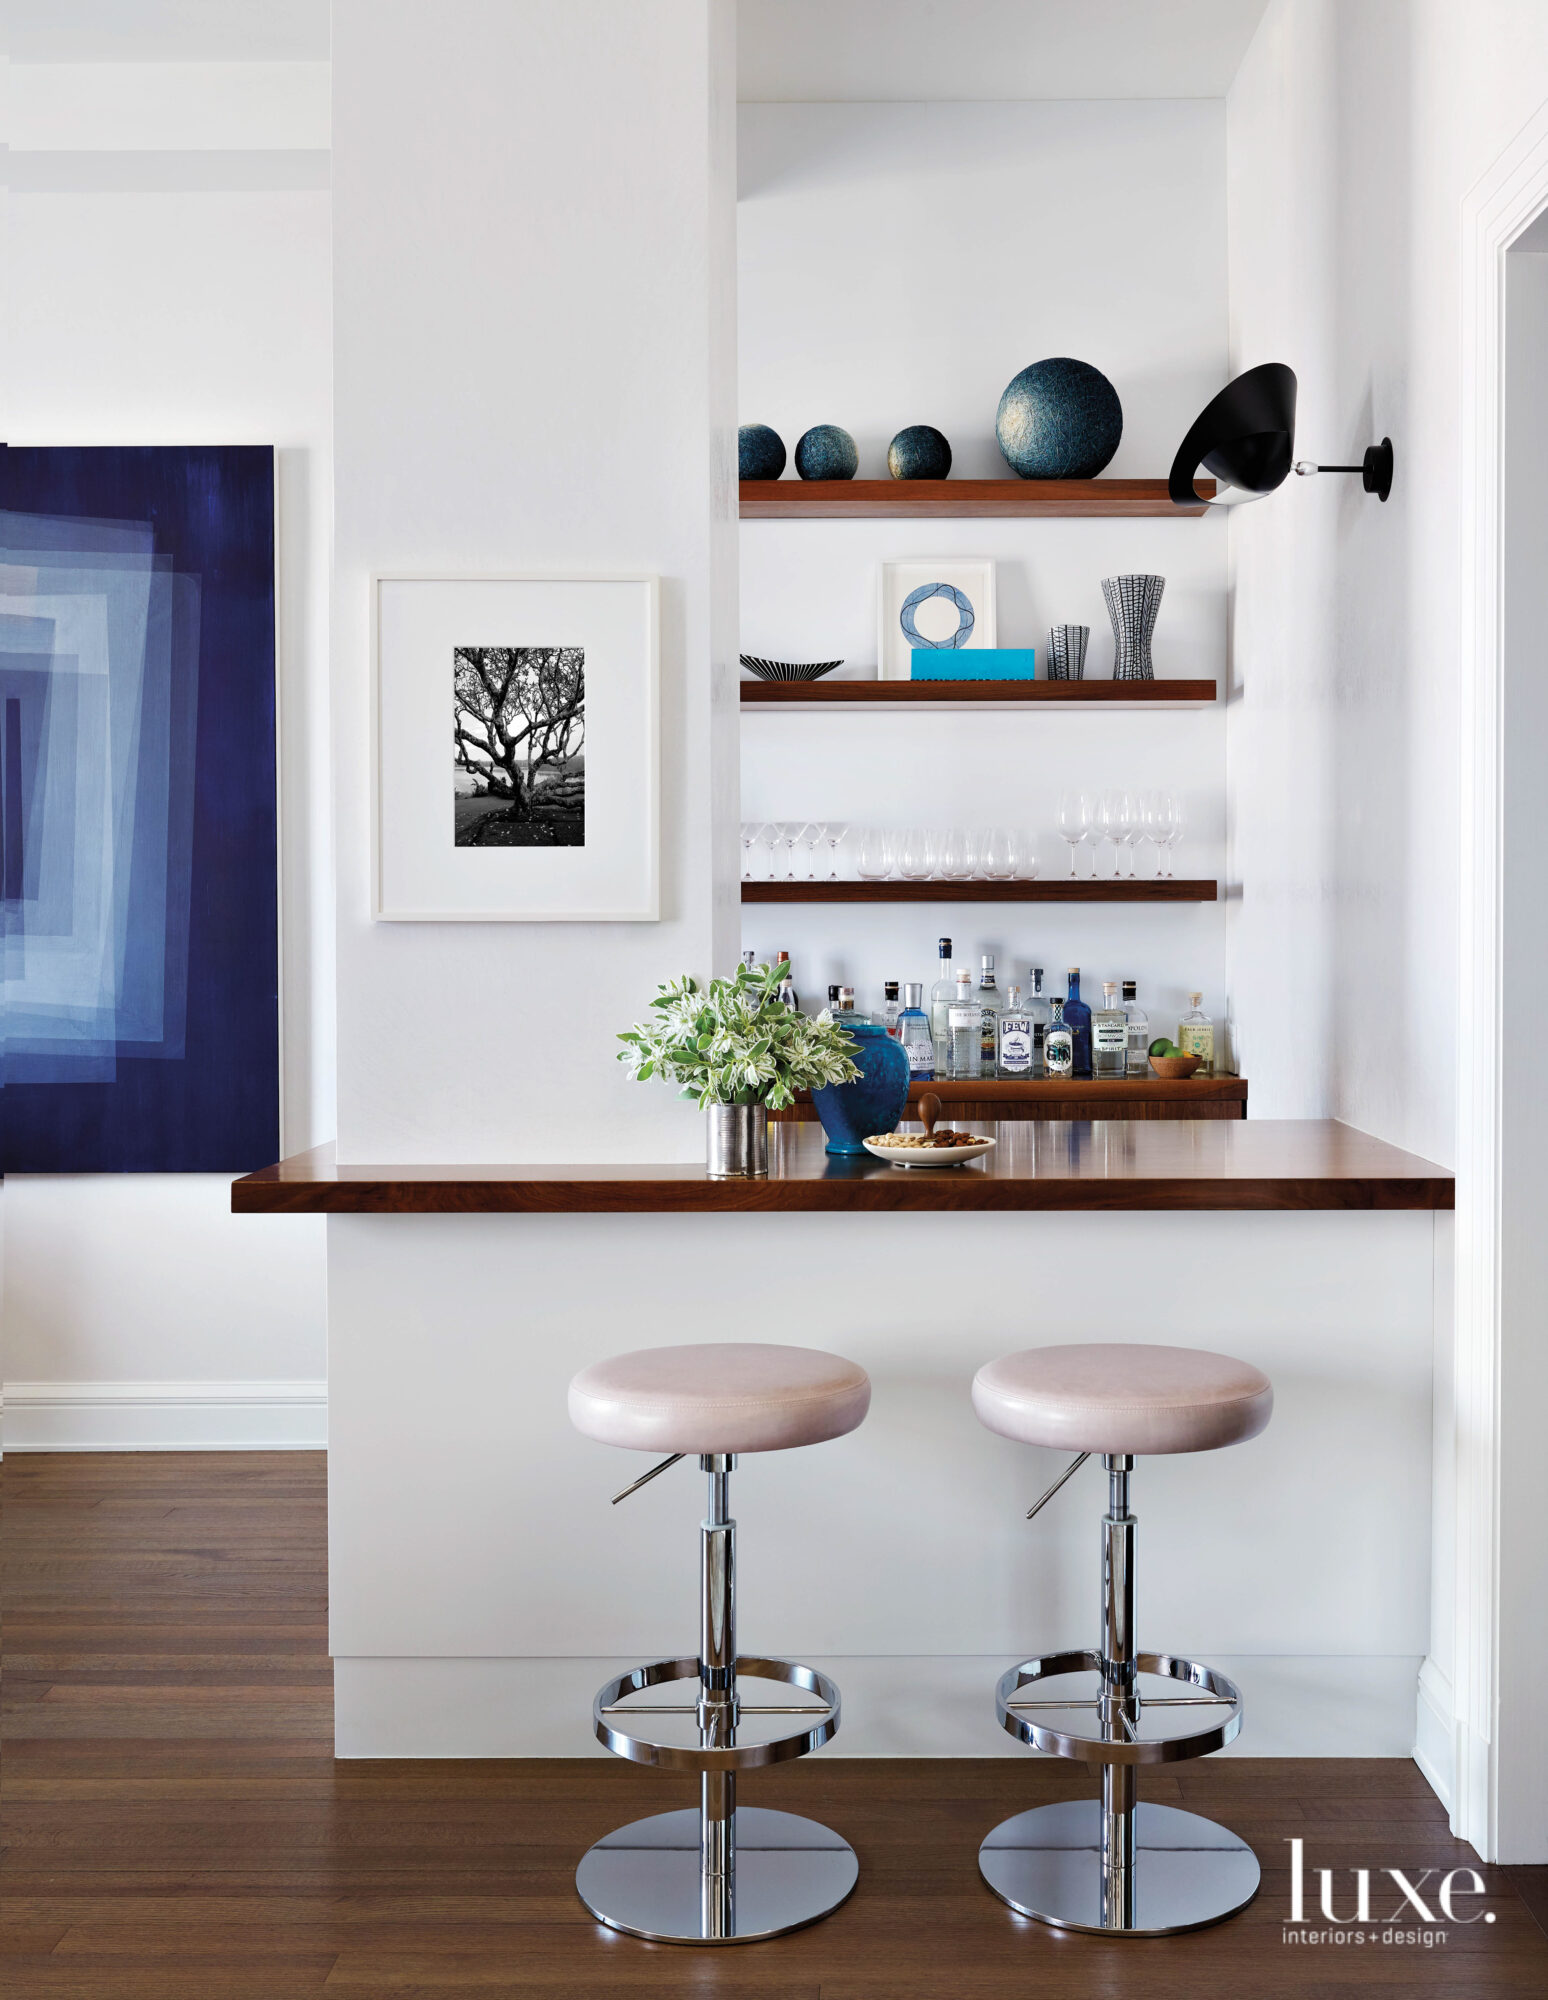 A simple dry bar sits in a corner of the living room, clad with shiny wood counter tops and shelves.